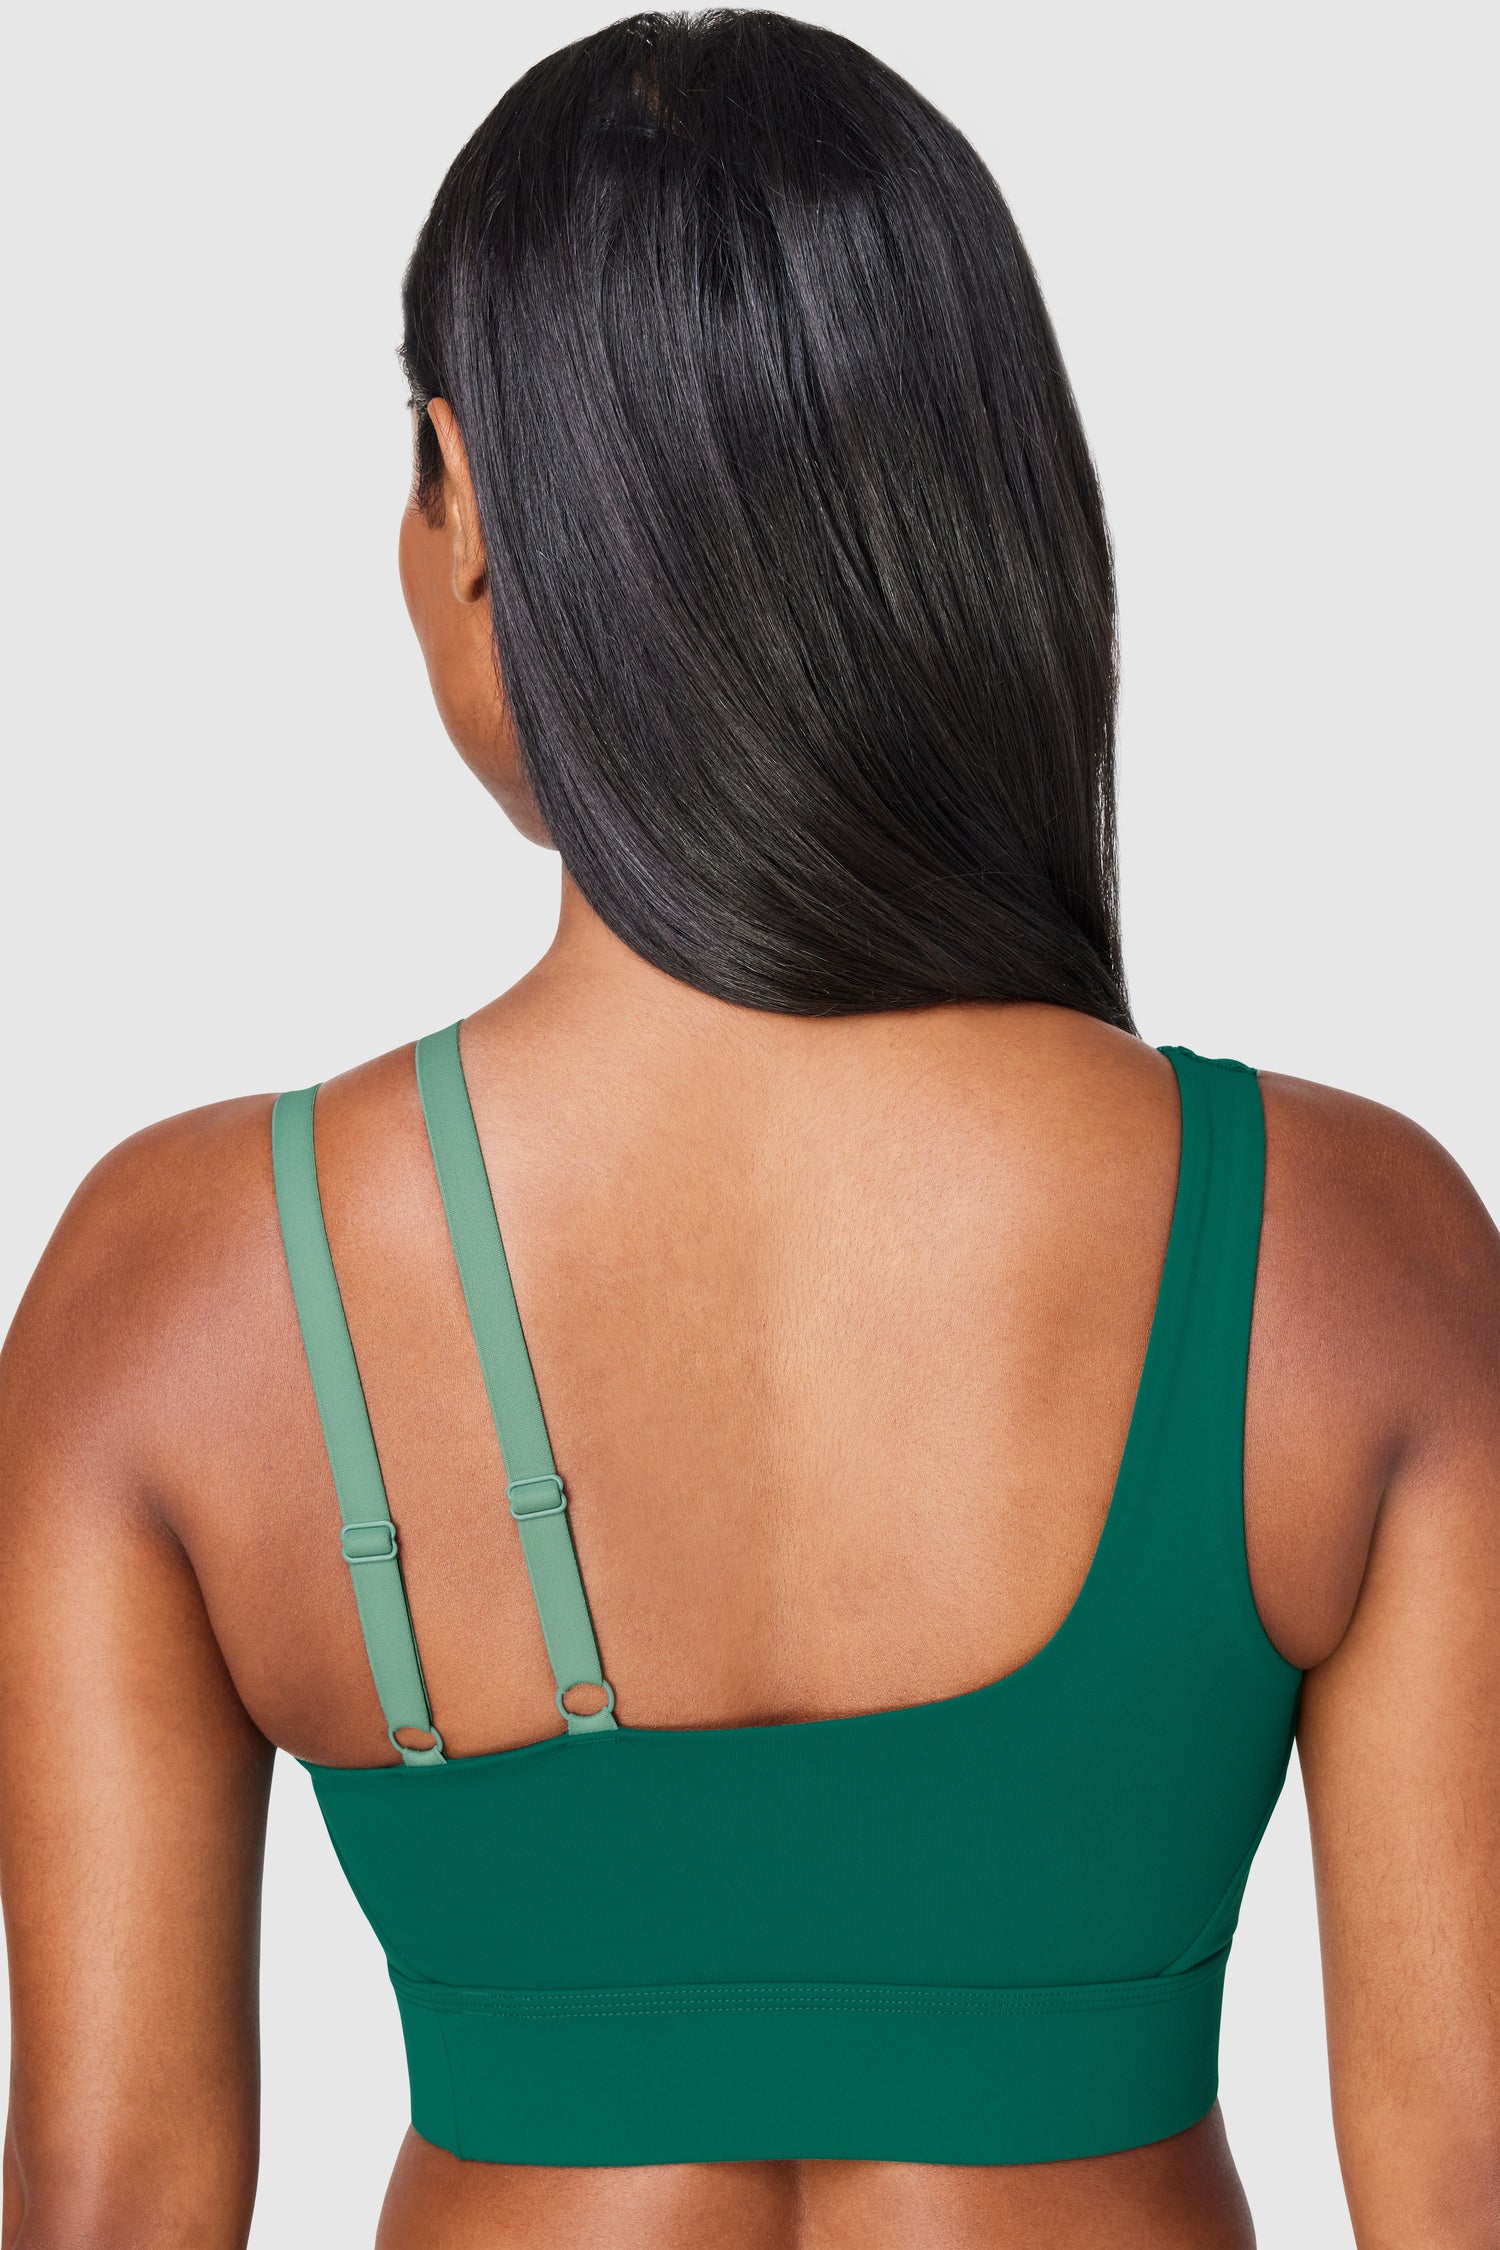 Spin Class Queen Mesh Sports Bra • Impressions Online Boutique